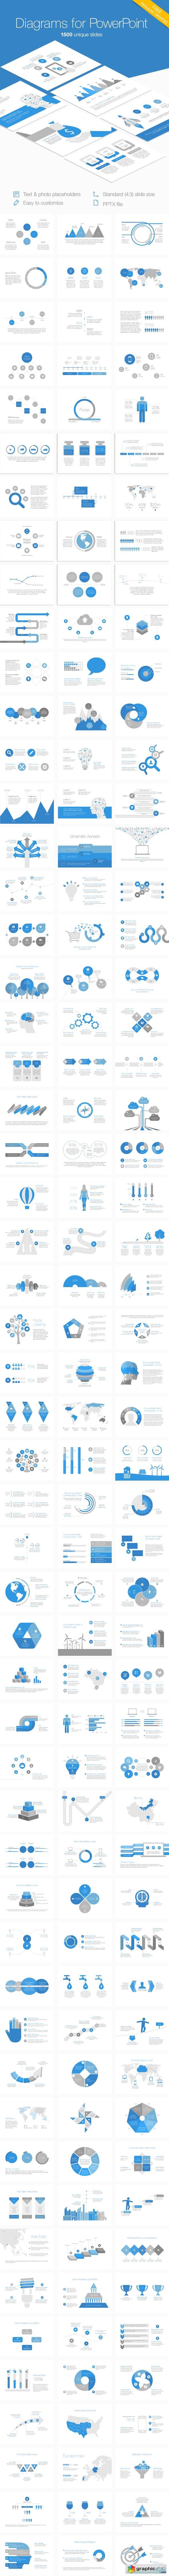 Diagrams for PowerPoint 7819833